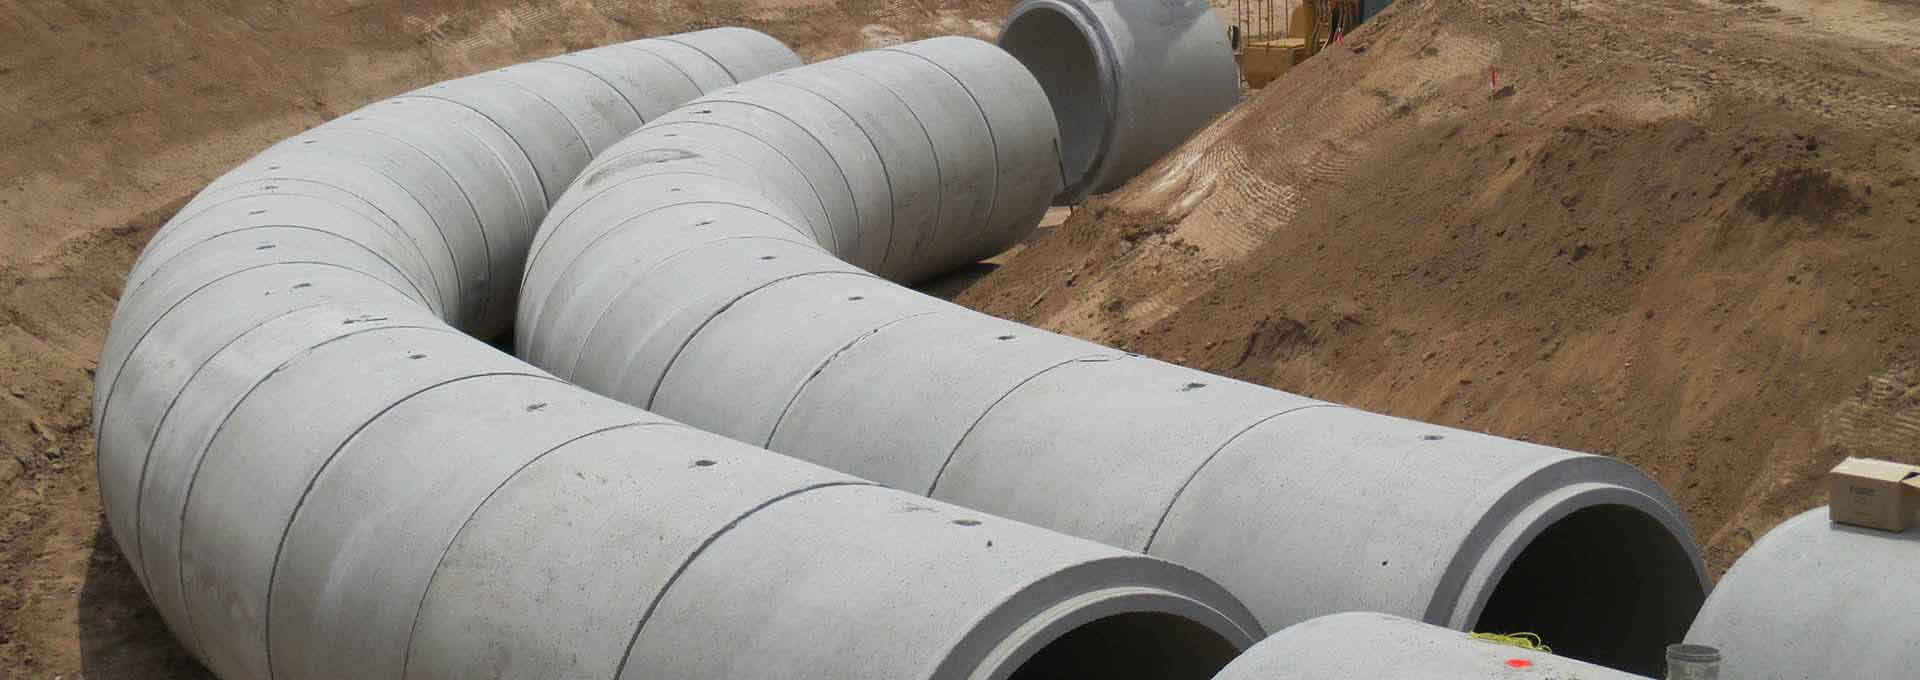 drainage systems by TPG image 10